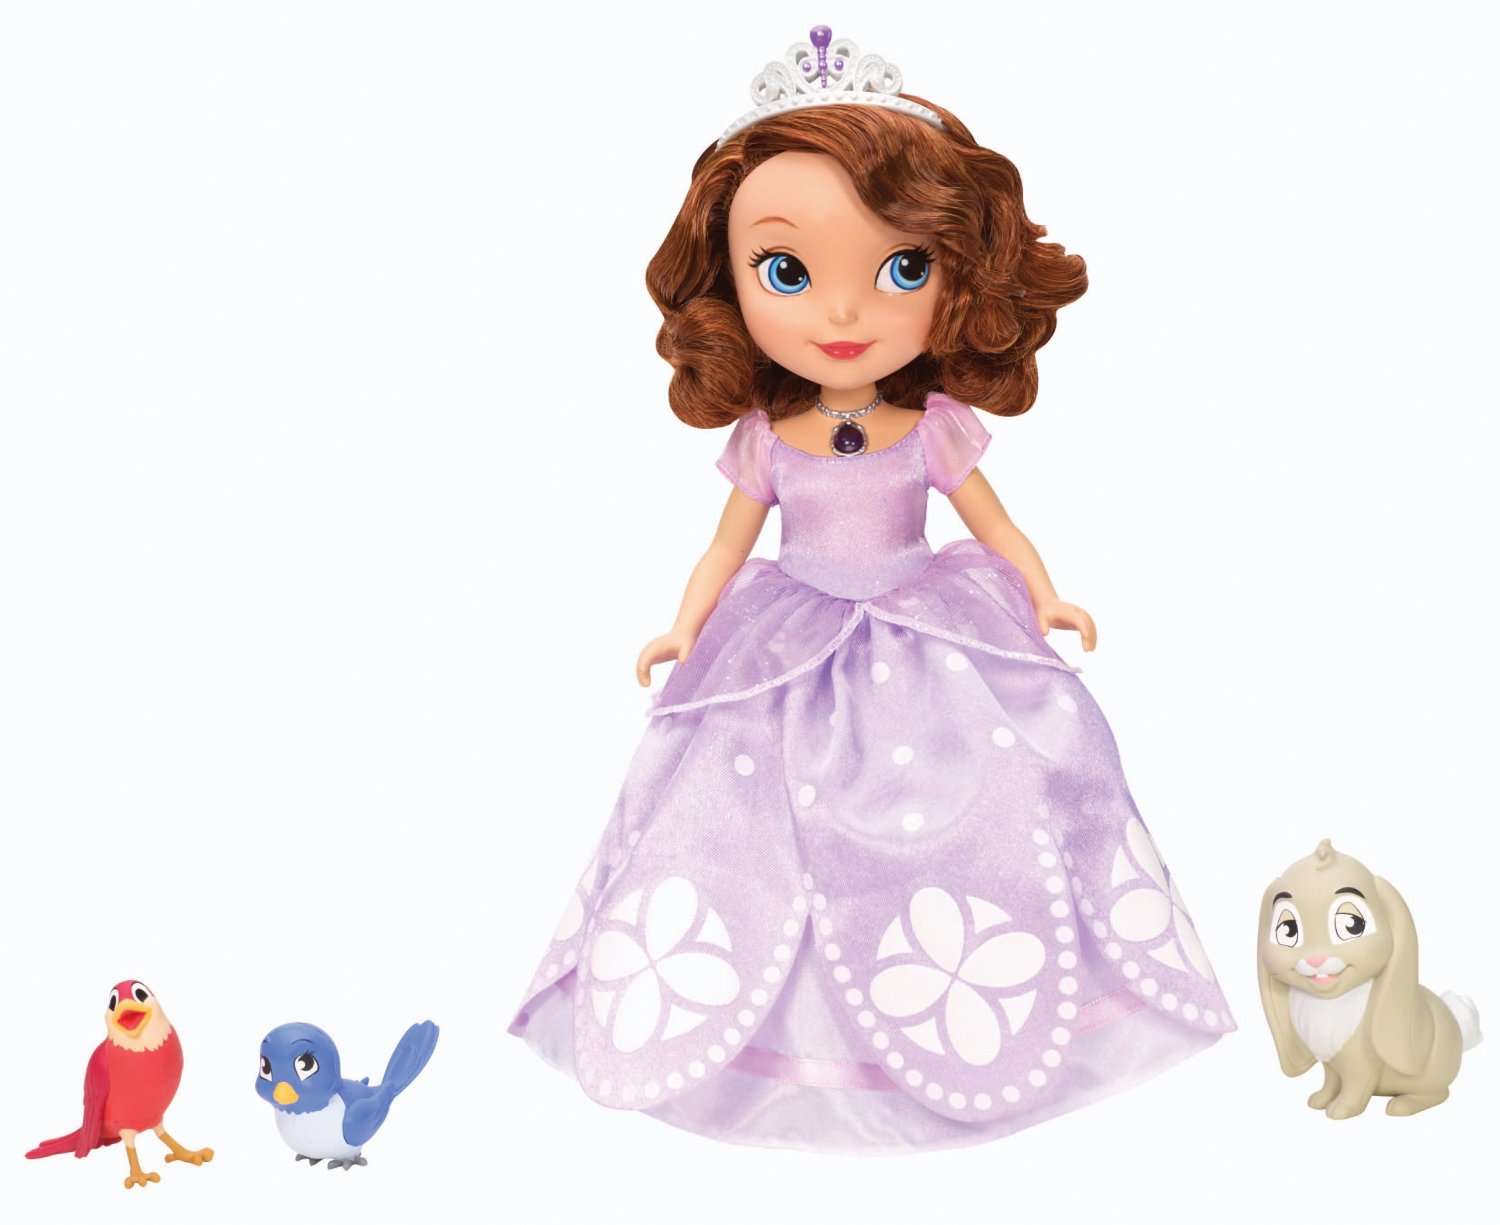 10 best SOFIA THE FIRST :) images on Pinterest | Disney 